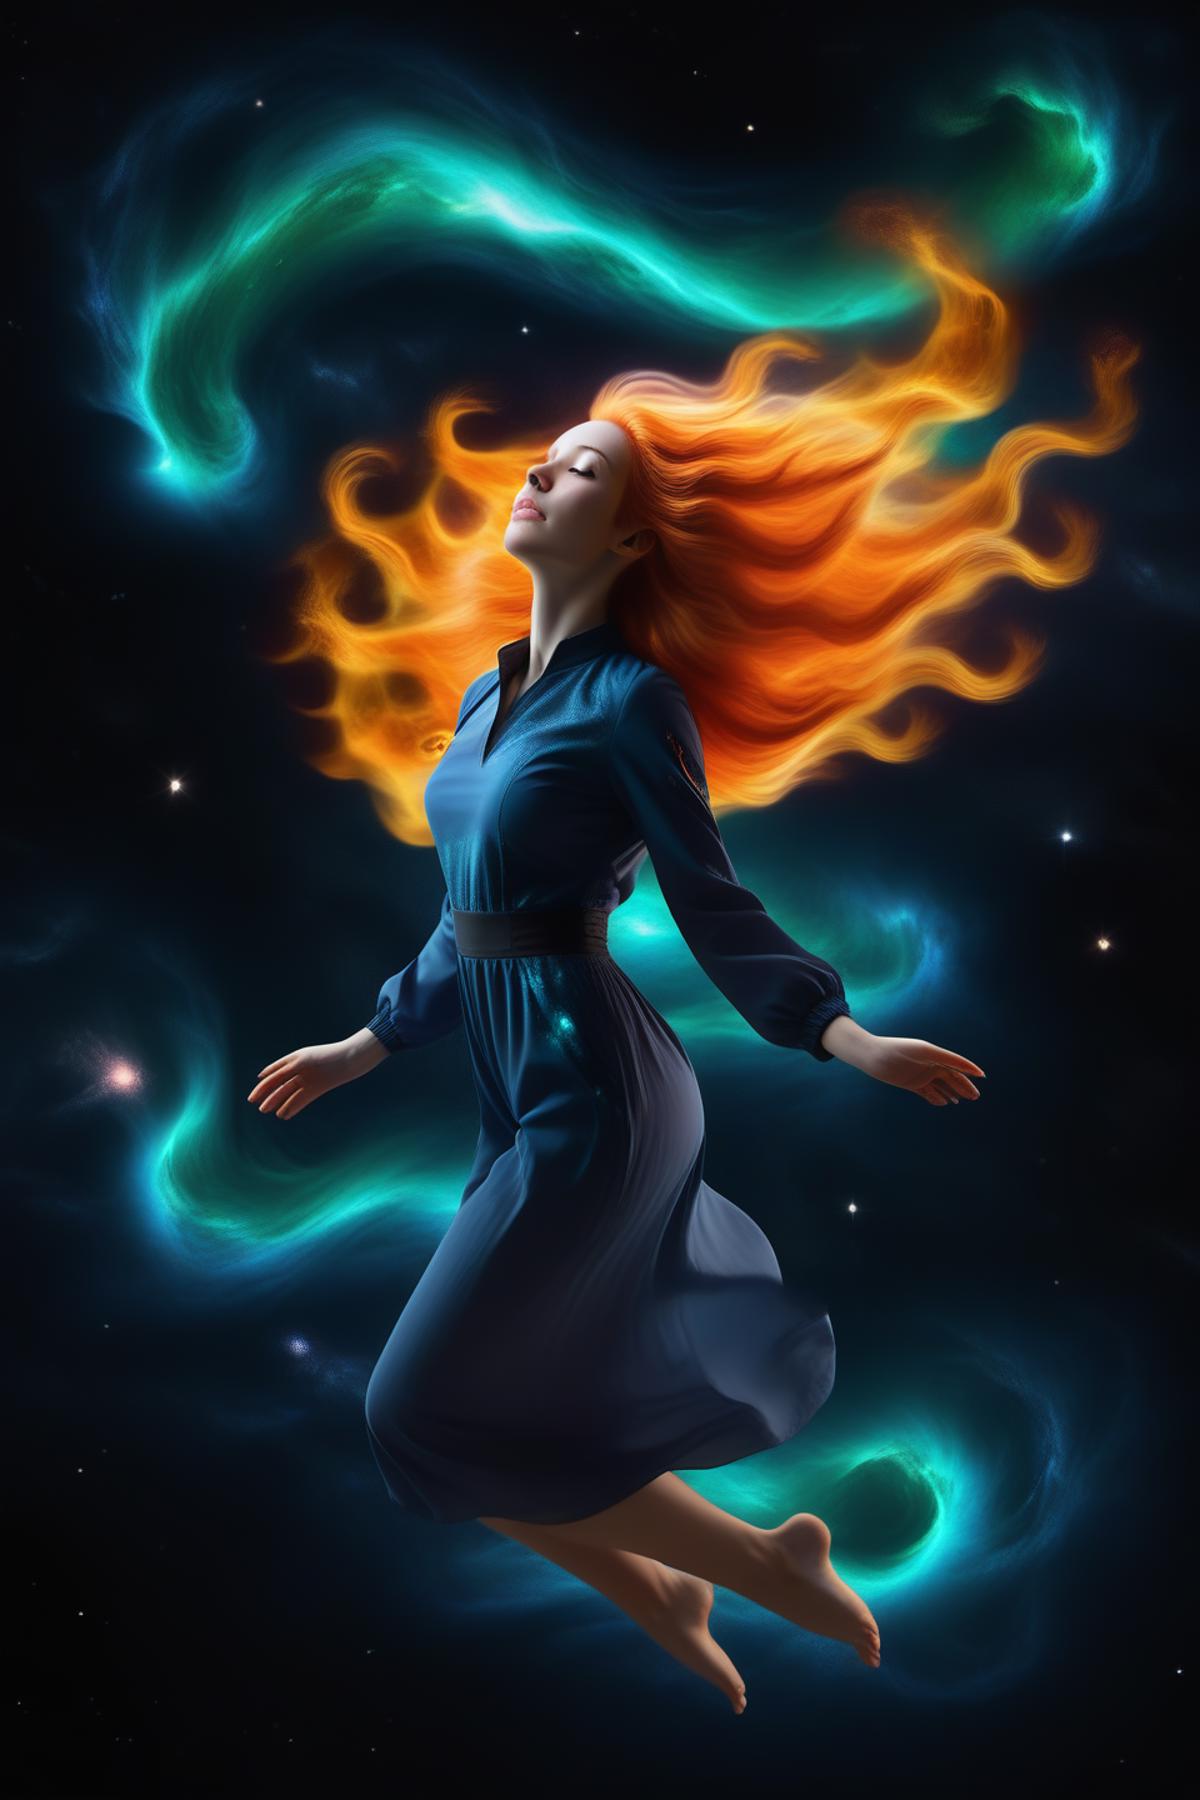 Fire hair - Hair in flames image by Catalorian